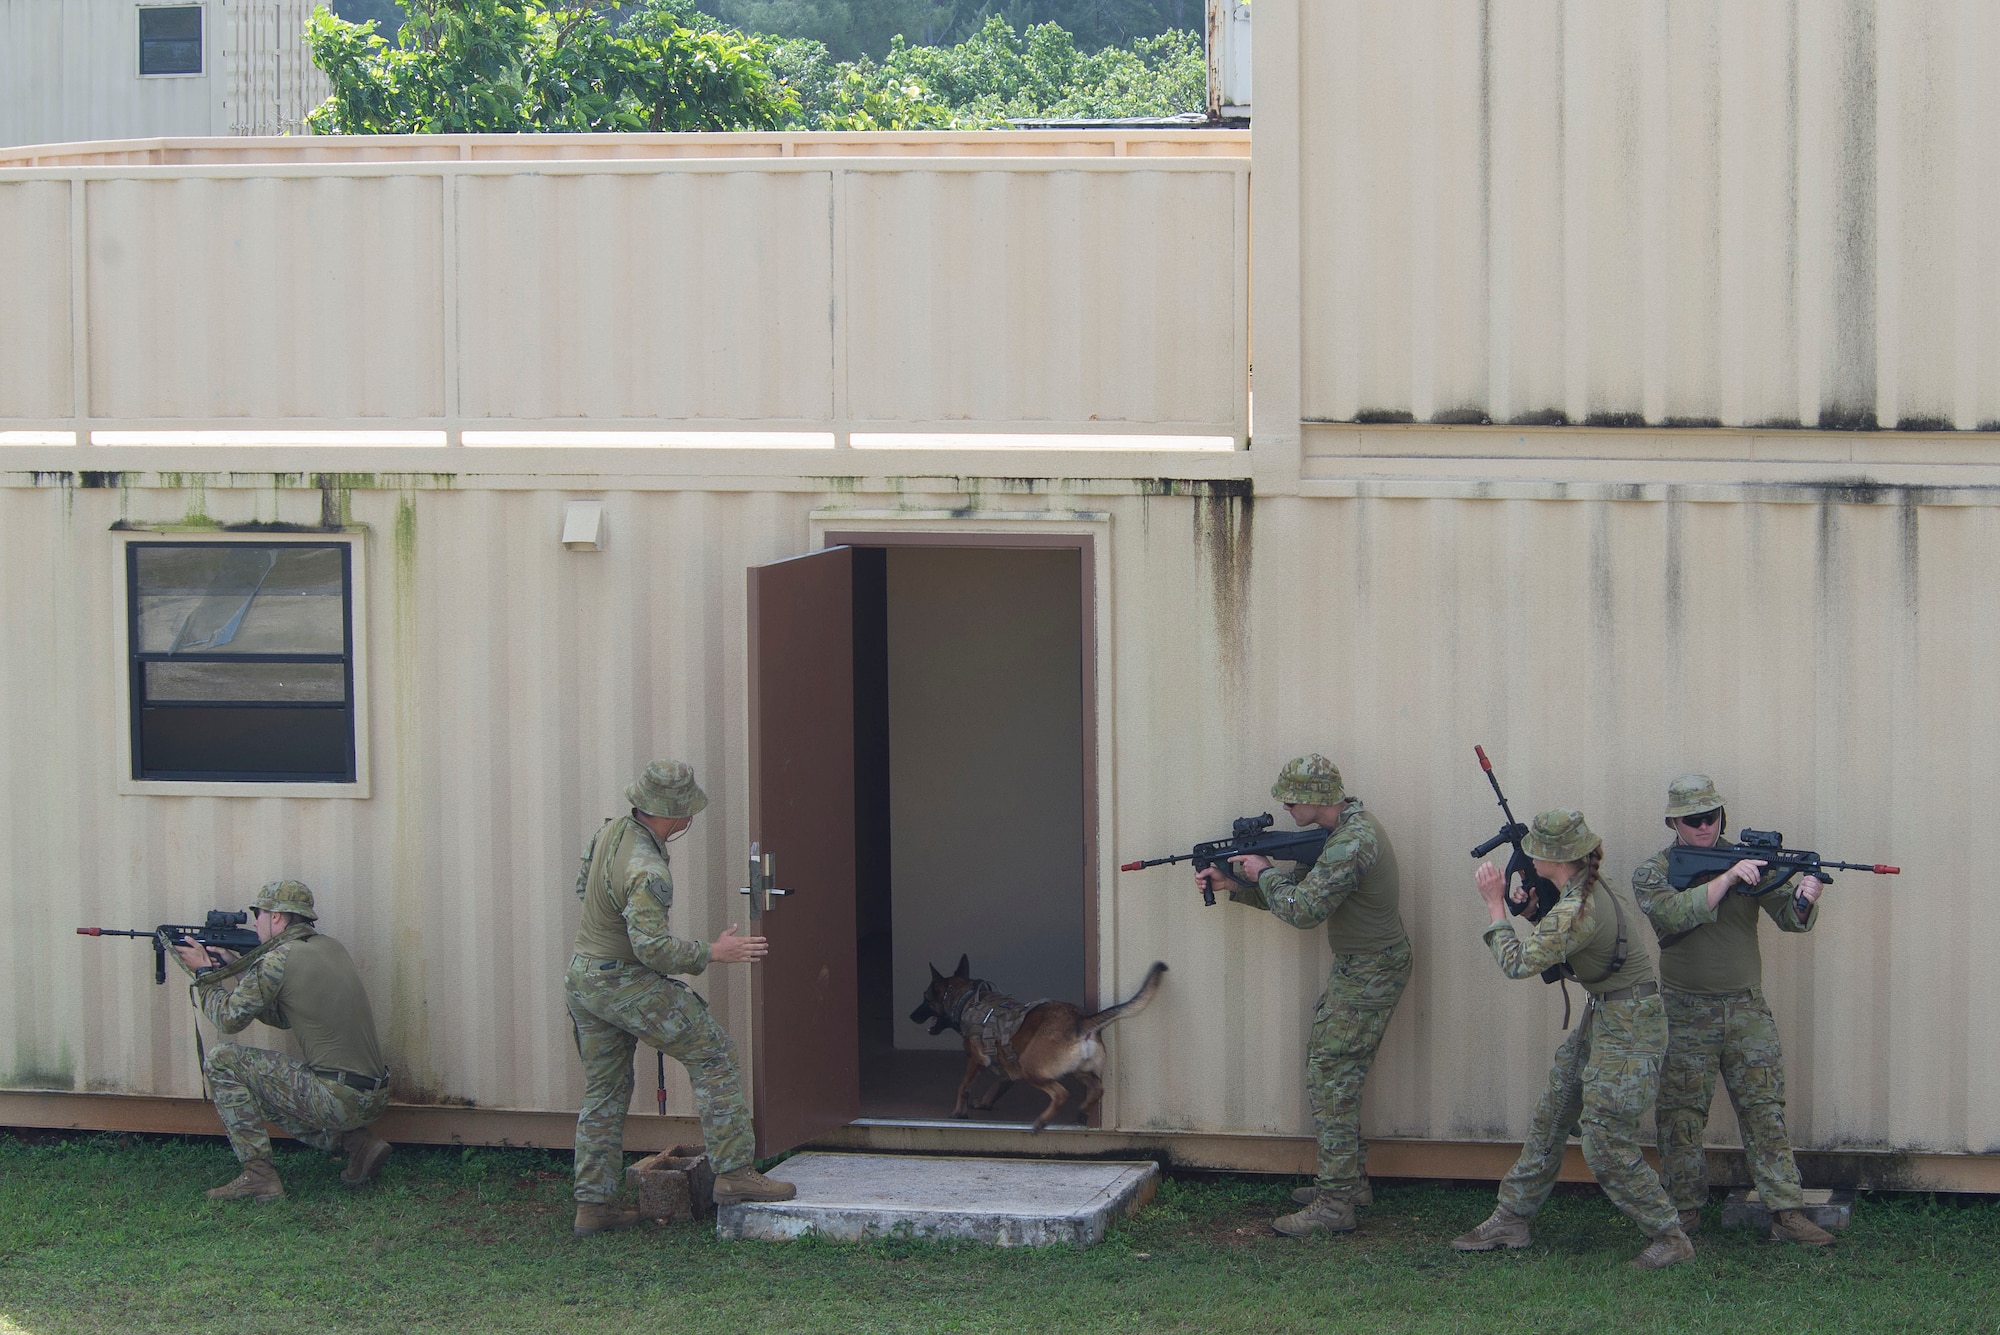 Royal Australian Air Force (RAAF) personnel stand ready as RAAF Military Working Dog (MWD) Xara enters a building to neutralize a simulated threat during Pacific Defender 20-1 at the Pacific Regional Training Center near Andersen Air Force Base, Guam, Feb. 11, 2020.